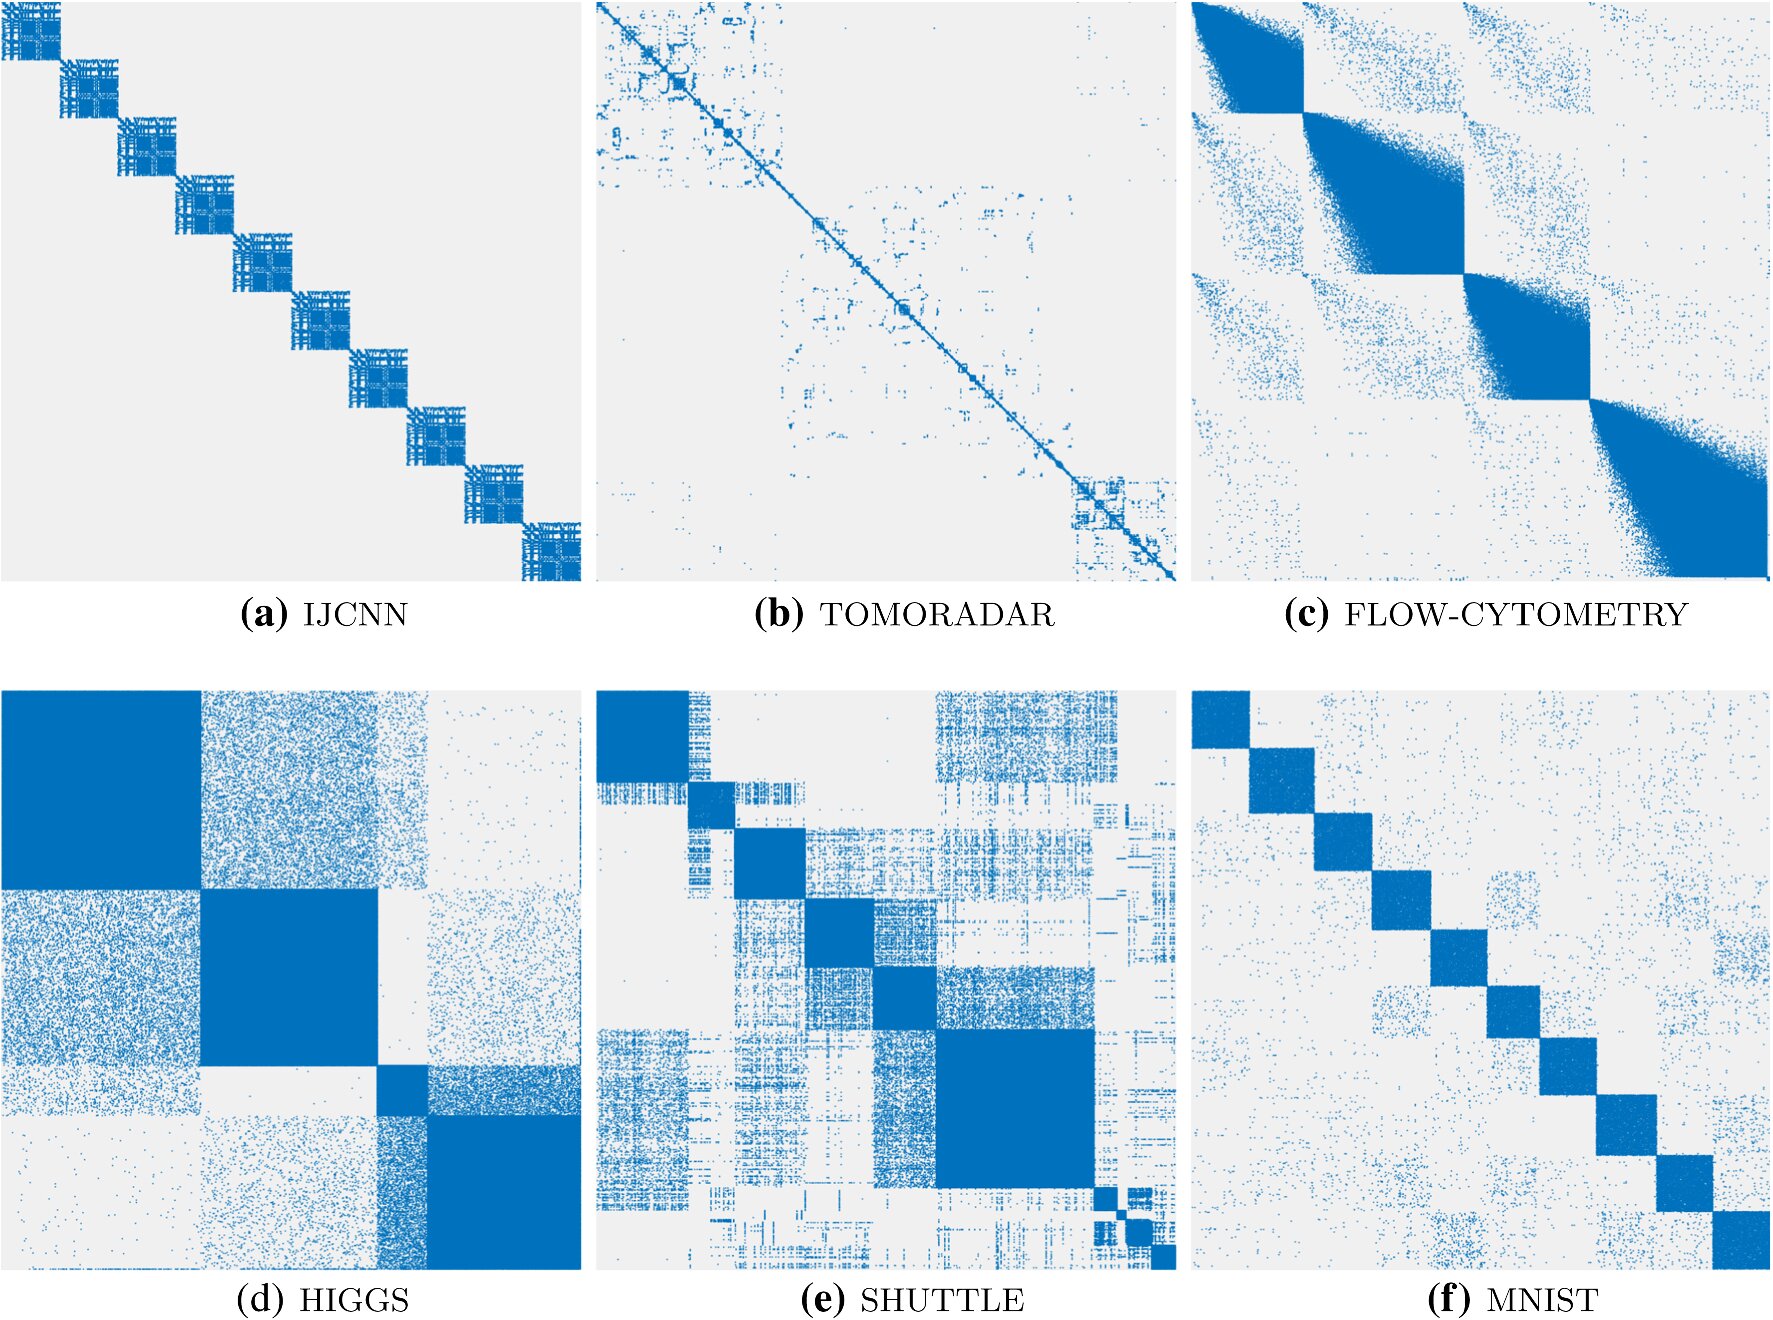 Artificial intelligence learns to visualize extensive datasets